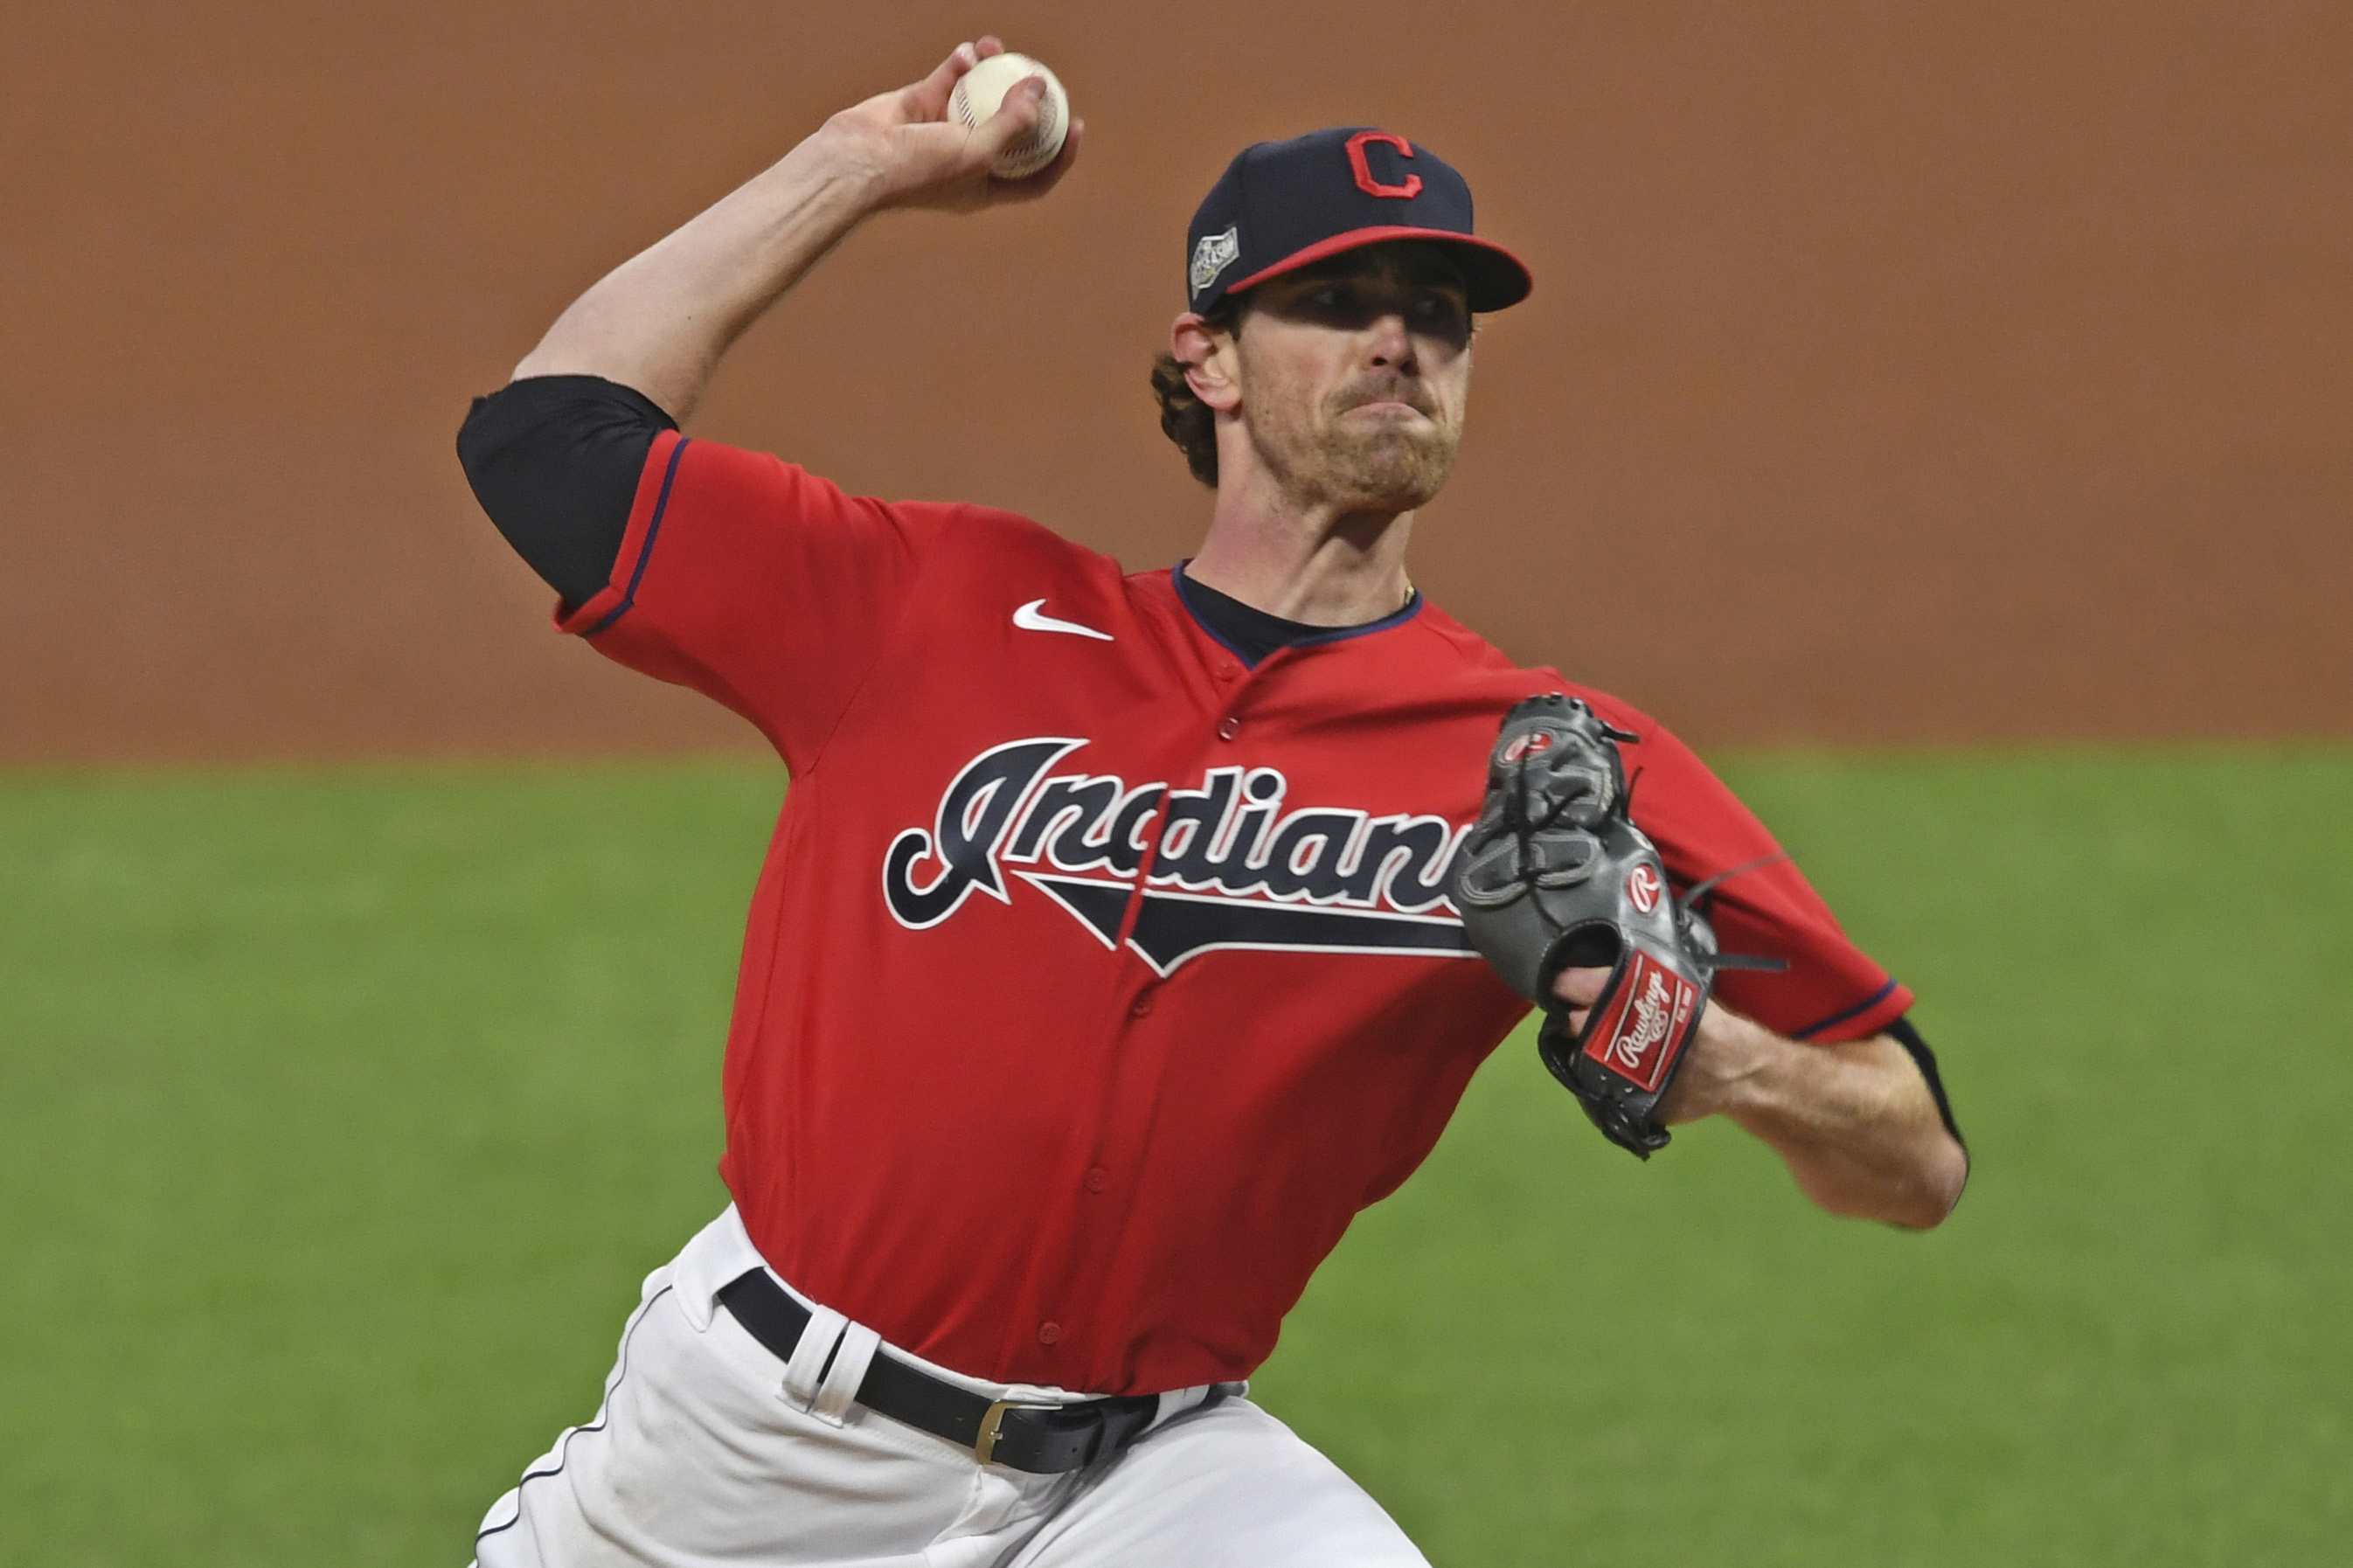 Cleveland Indians have themselves quite a bargain in Cy Young